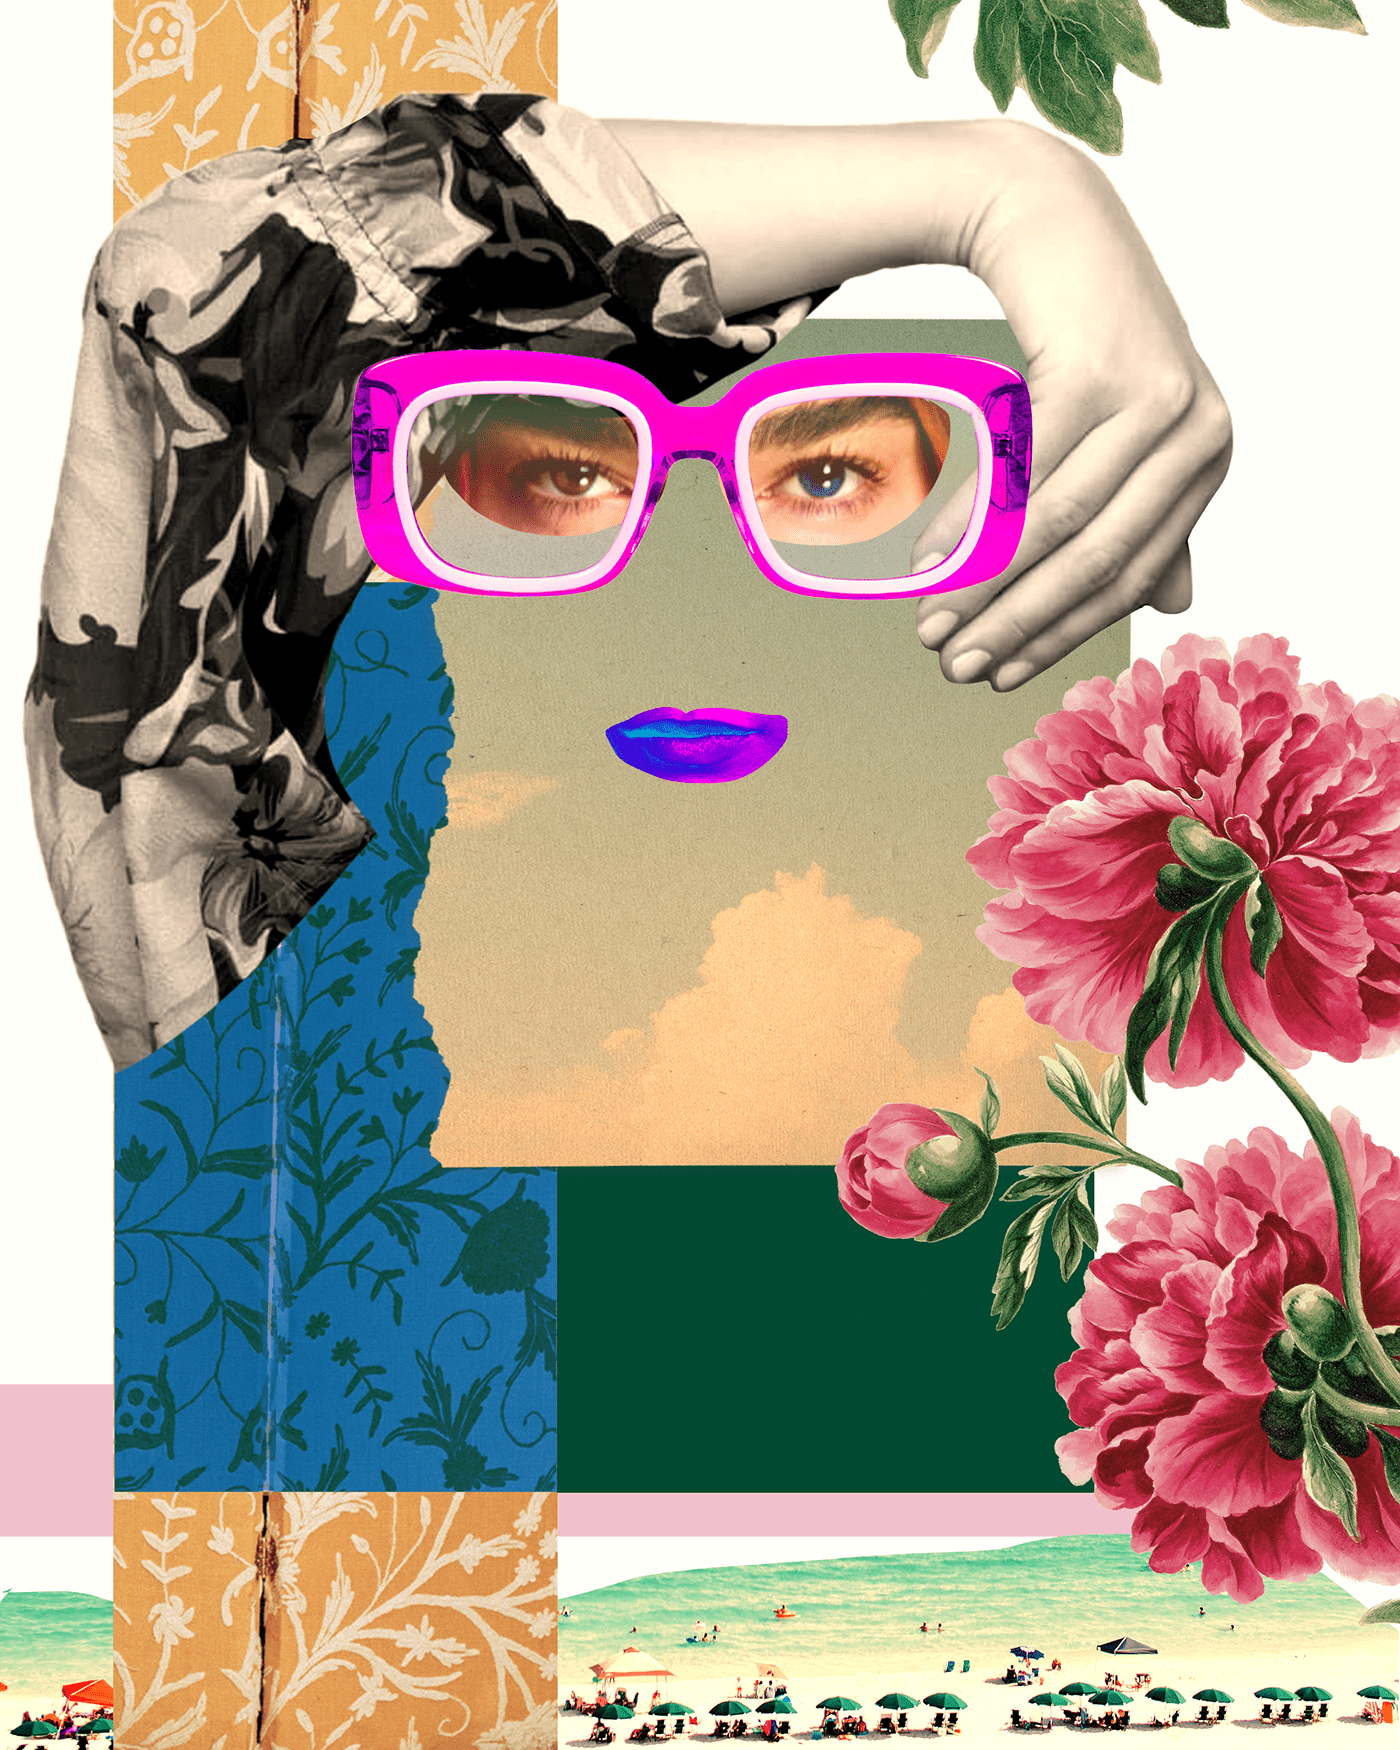 Fashion collage featuring a face, sunglasses and plants.